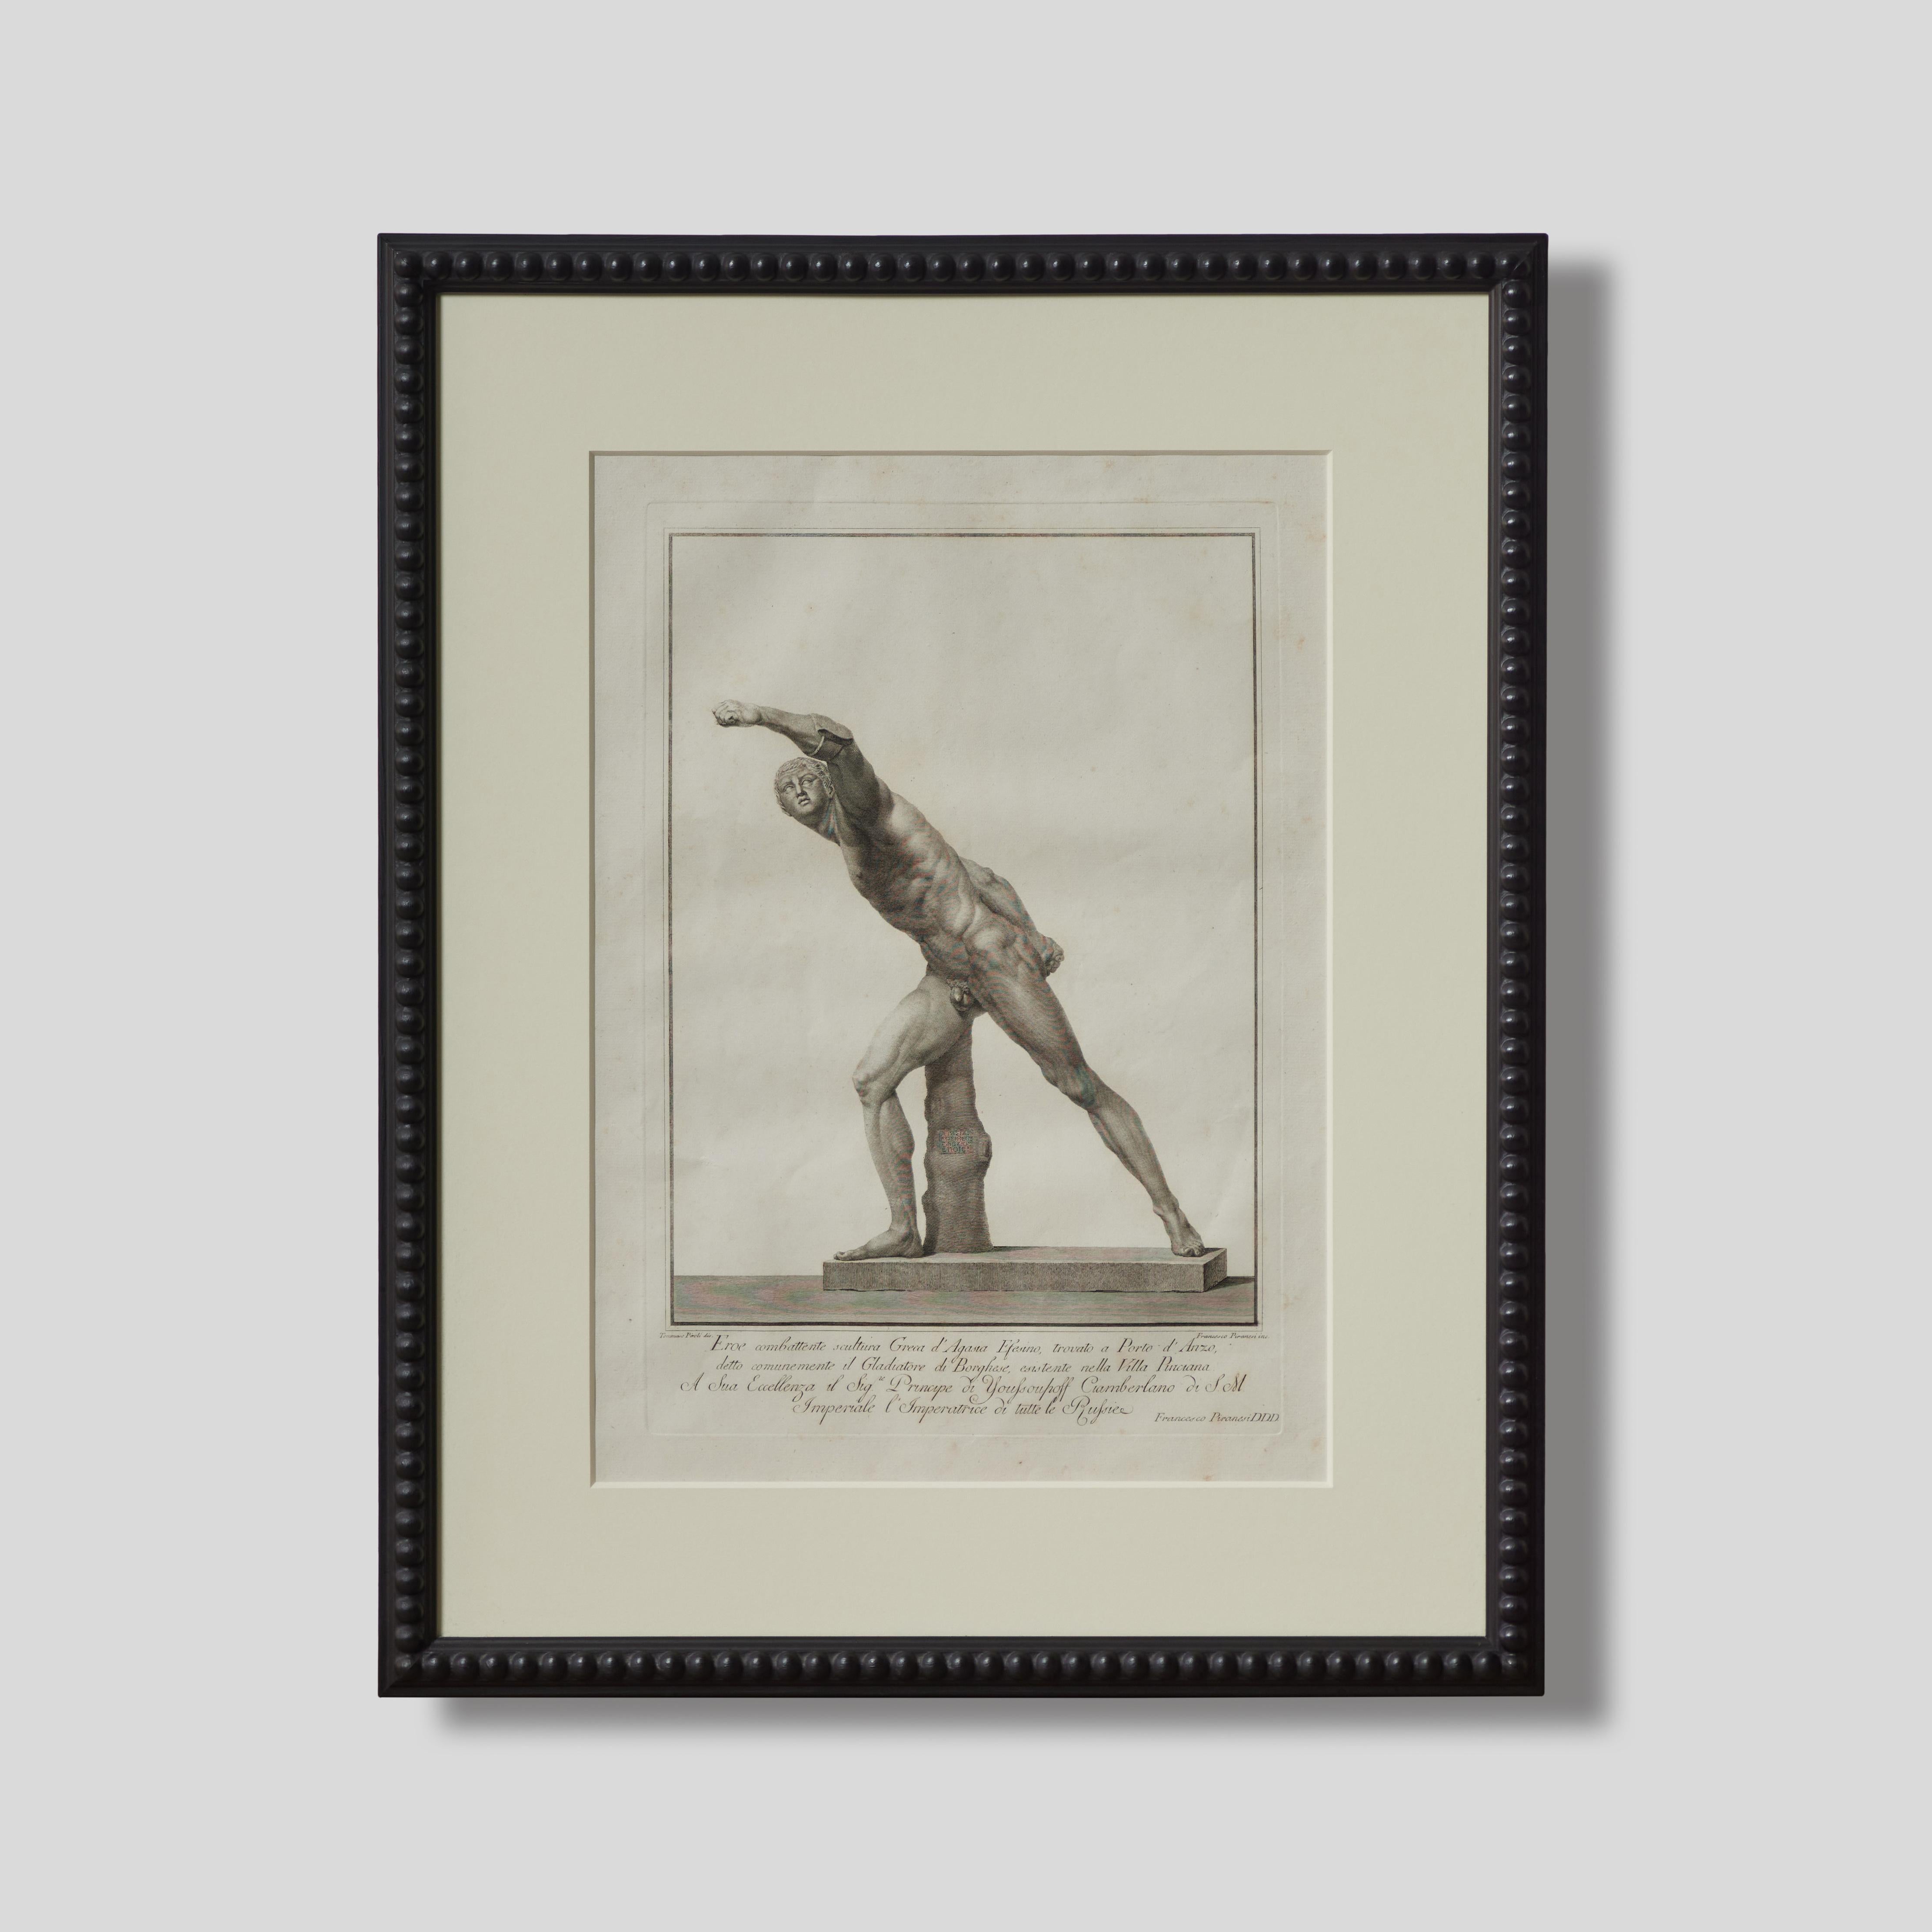 Framed and signed print of the Borghese Gladiator by legendary engraver, etcher, and architect Francesco Piranesi. An masterful study of line, gesture, and torque, this special piece conjures a triumphant spirit. 

Italy, circa